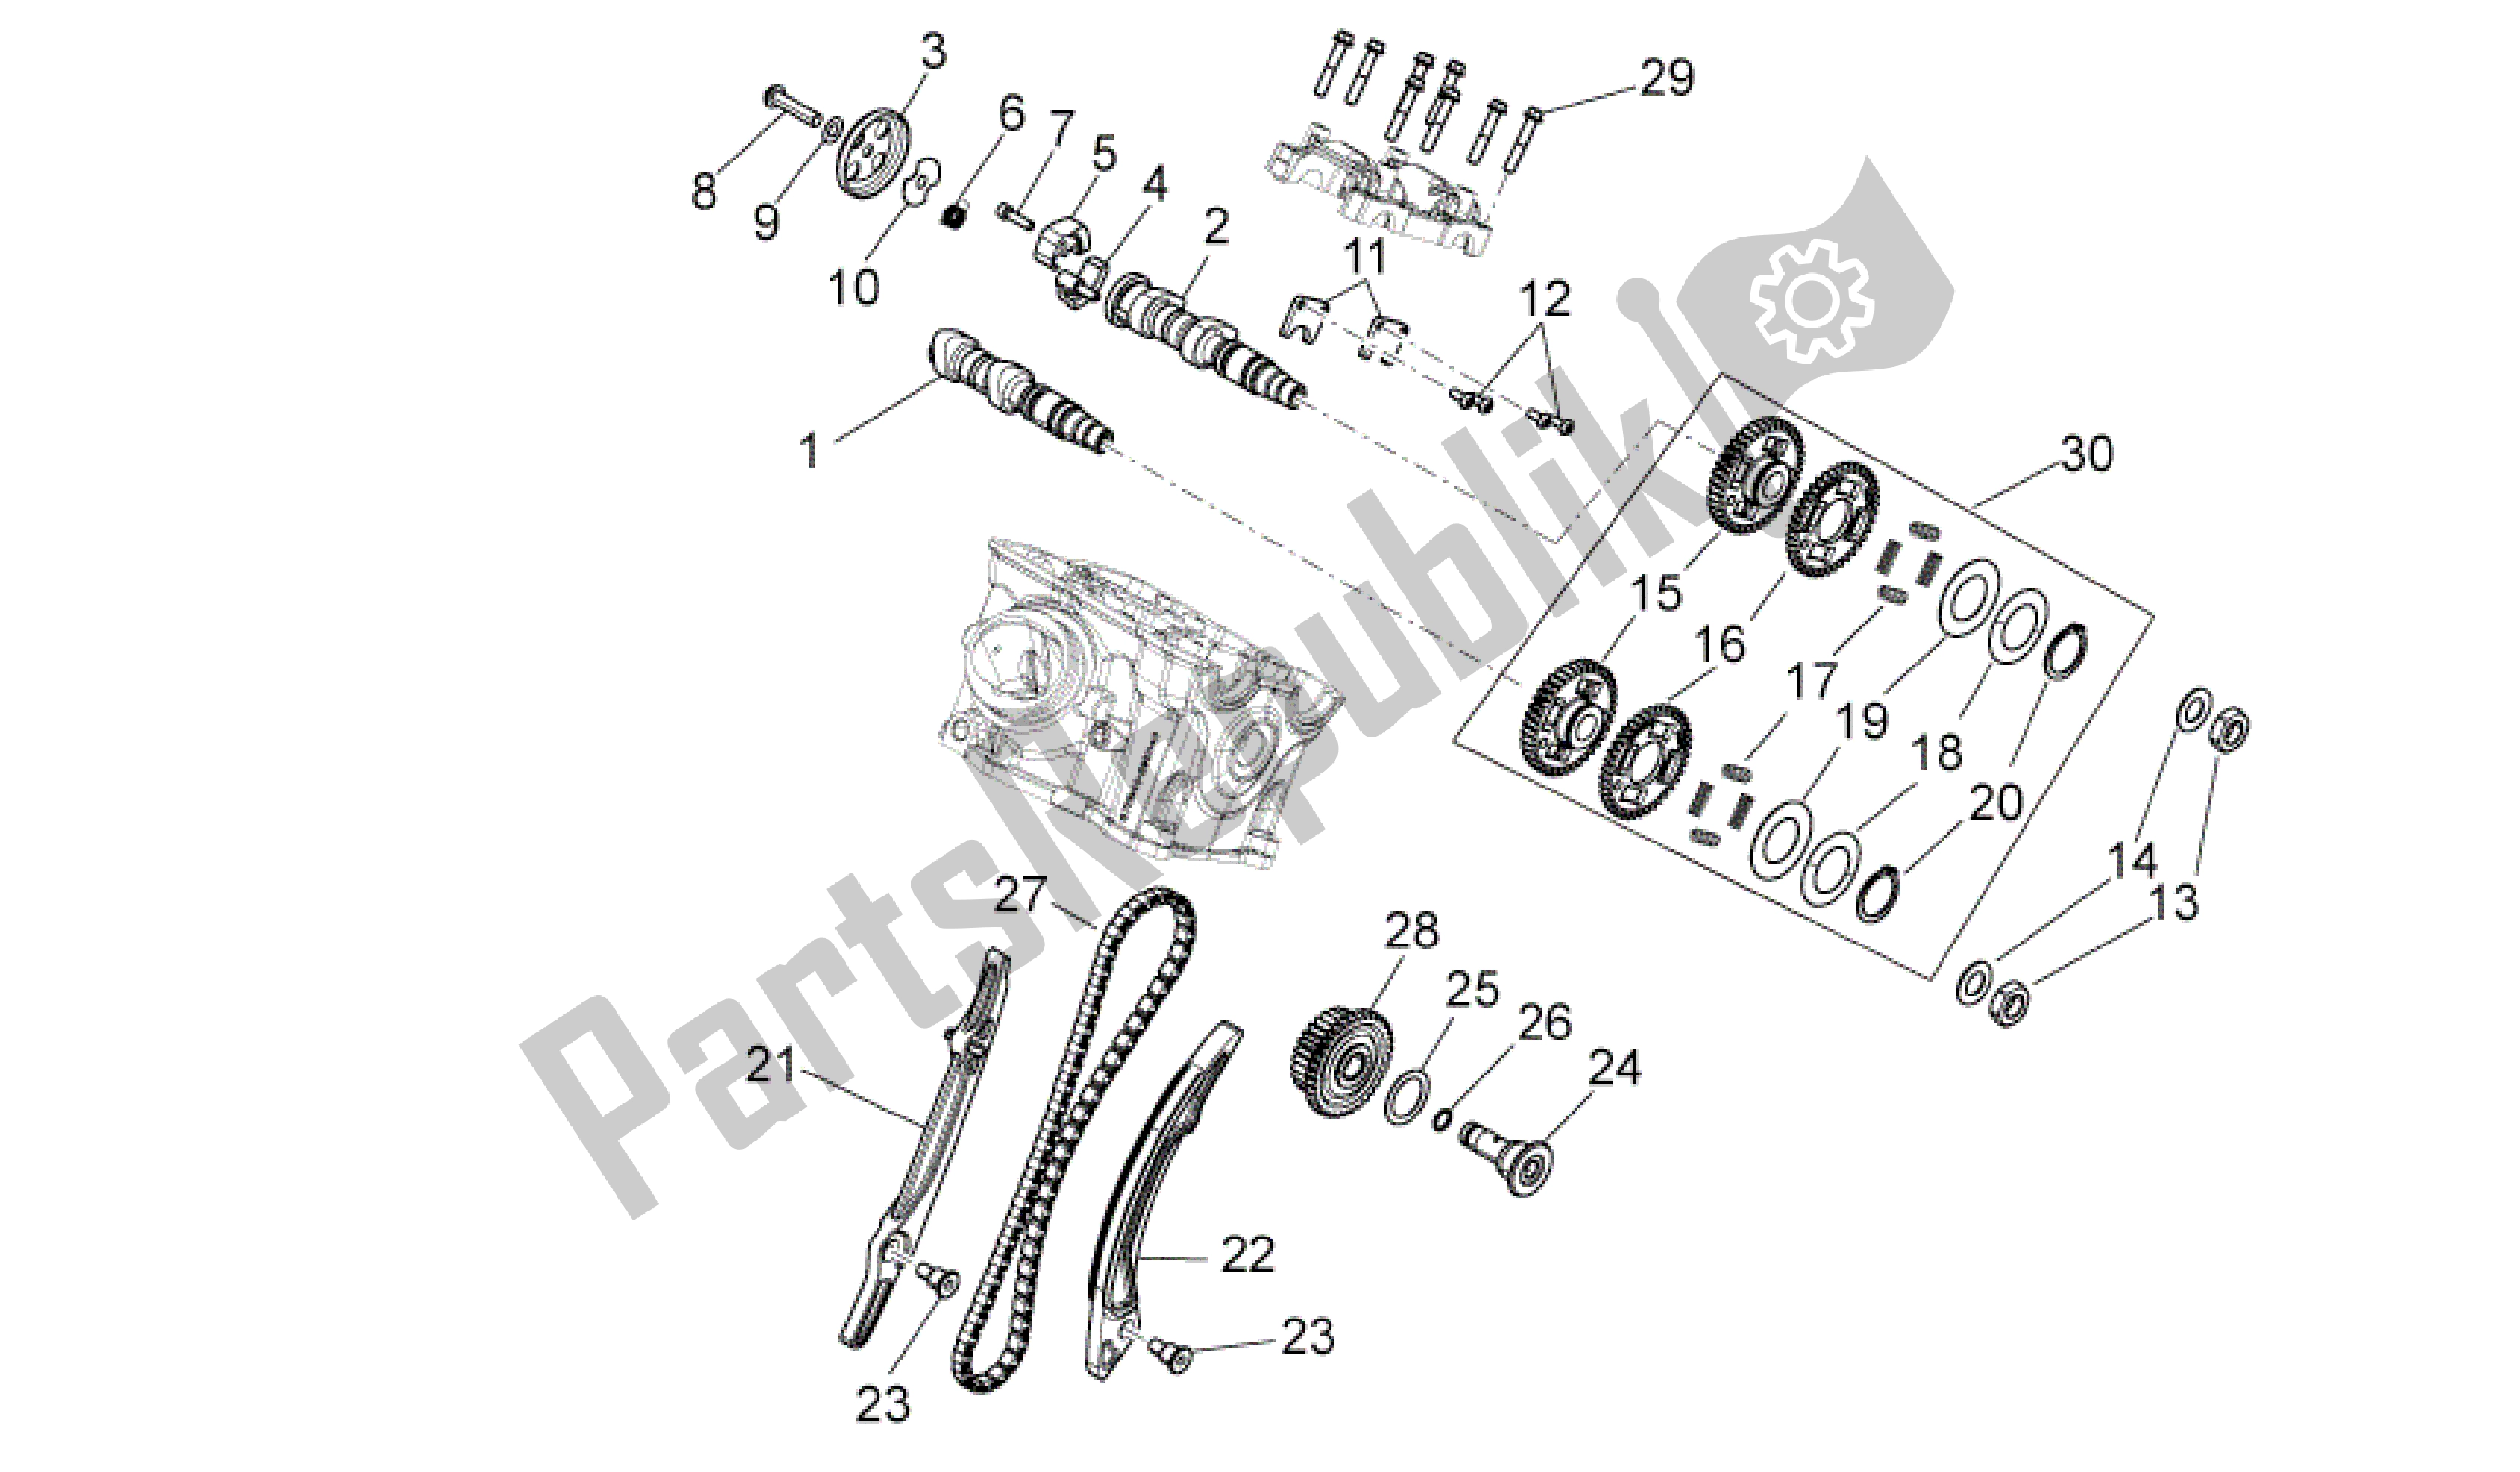 All parts for the Rear Cylinder Timing System of the Aprilia Dorsoduro 1200 2010 - 2013